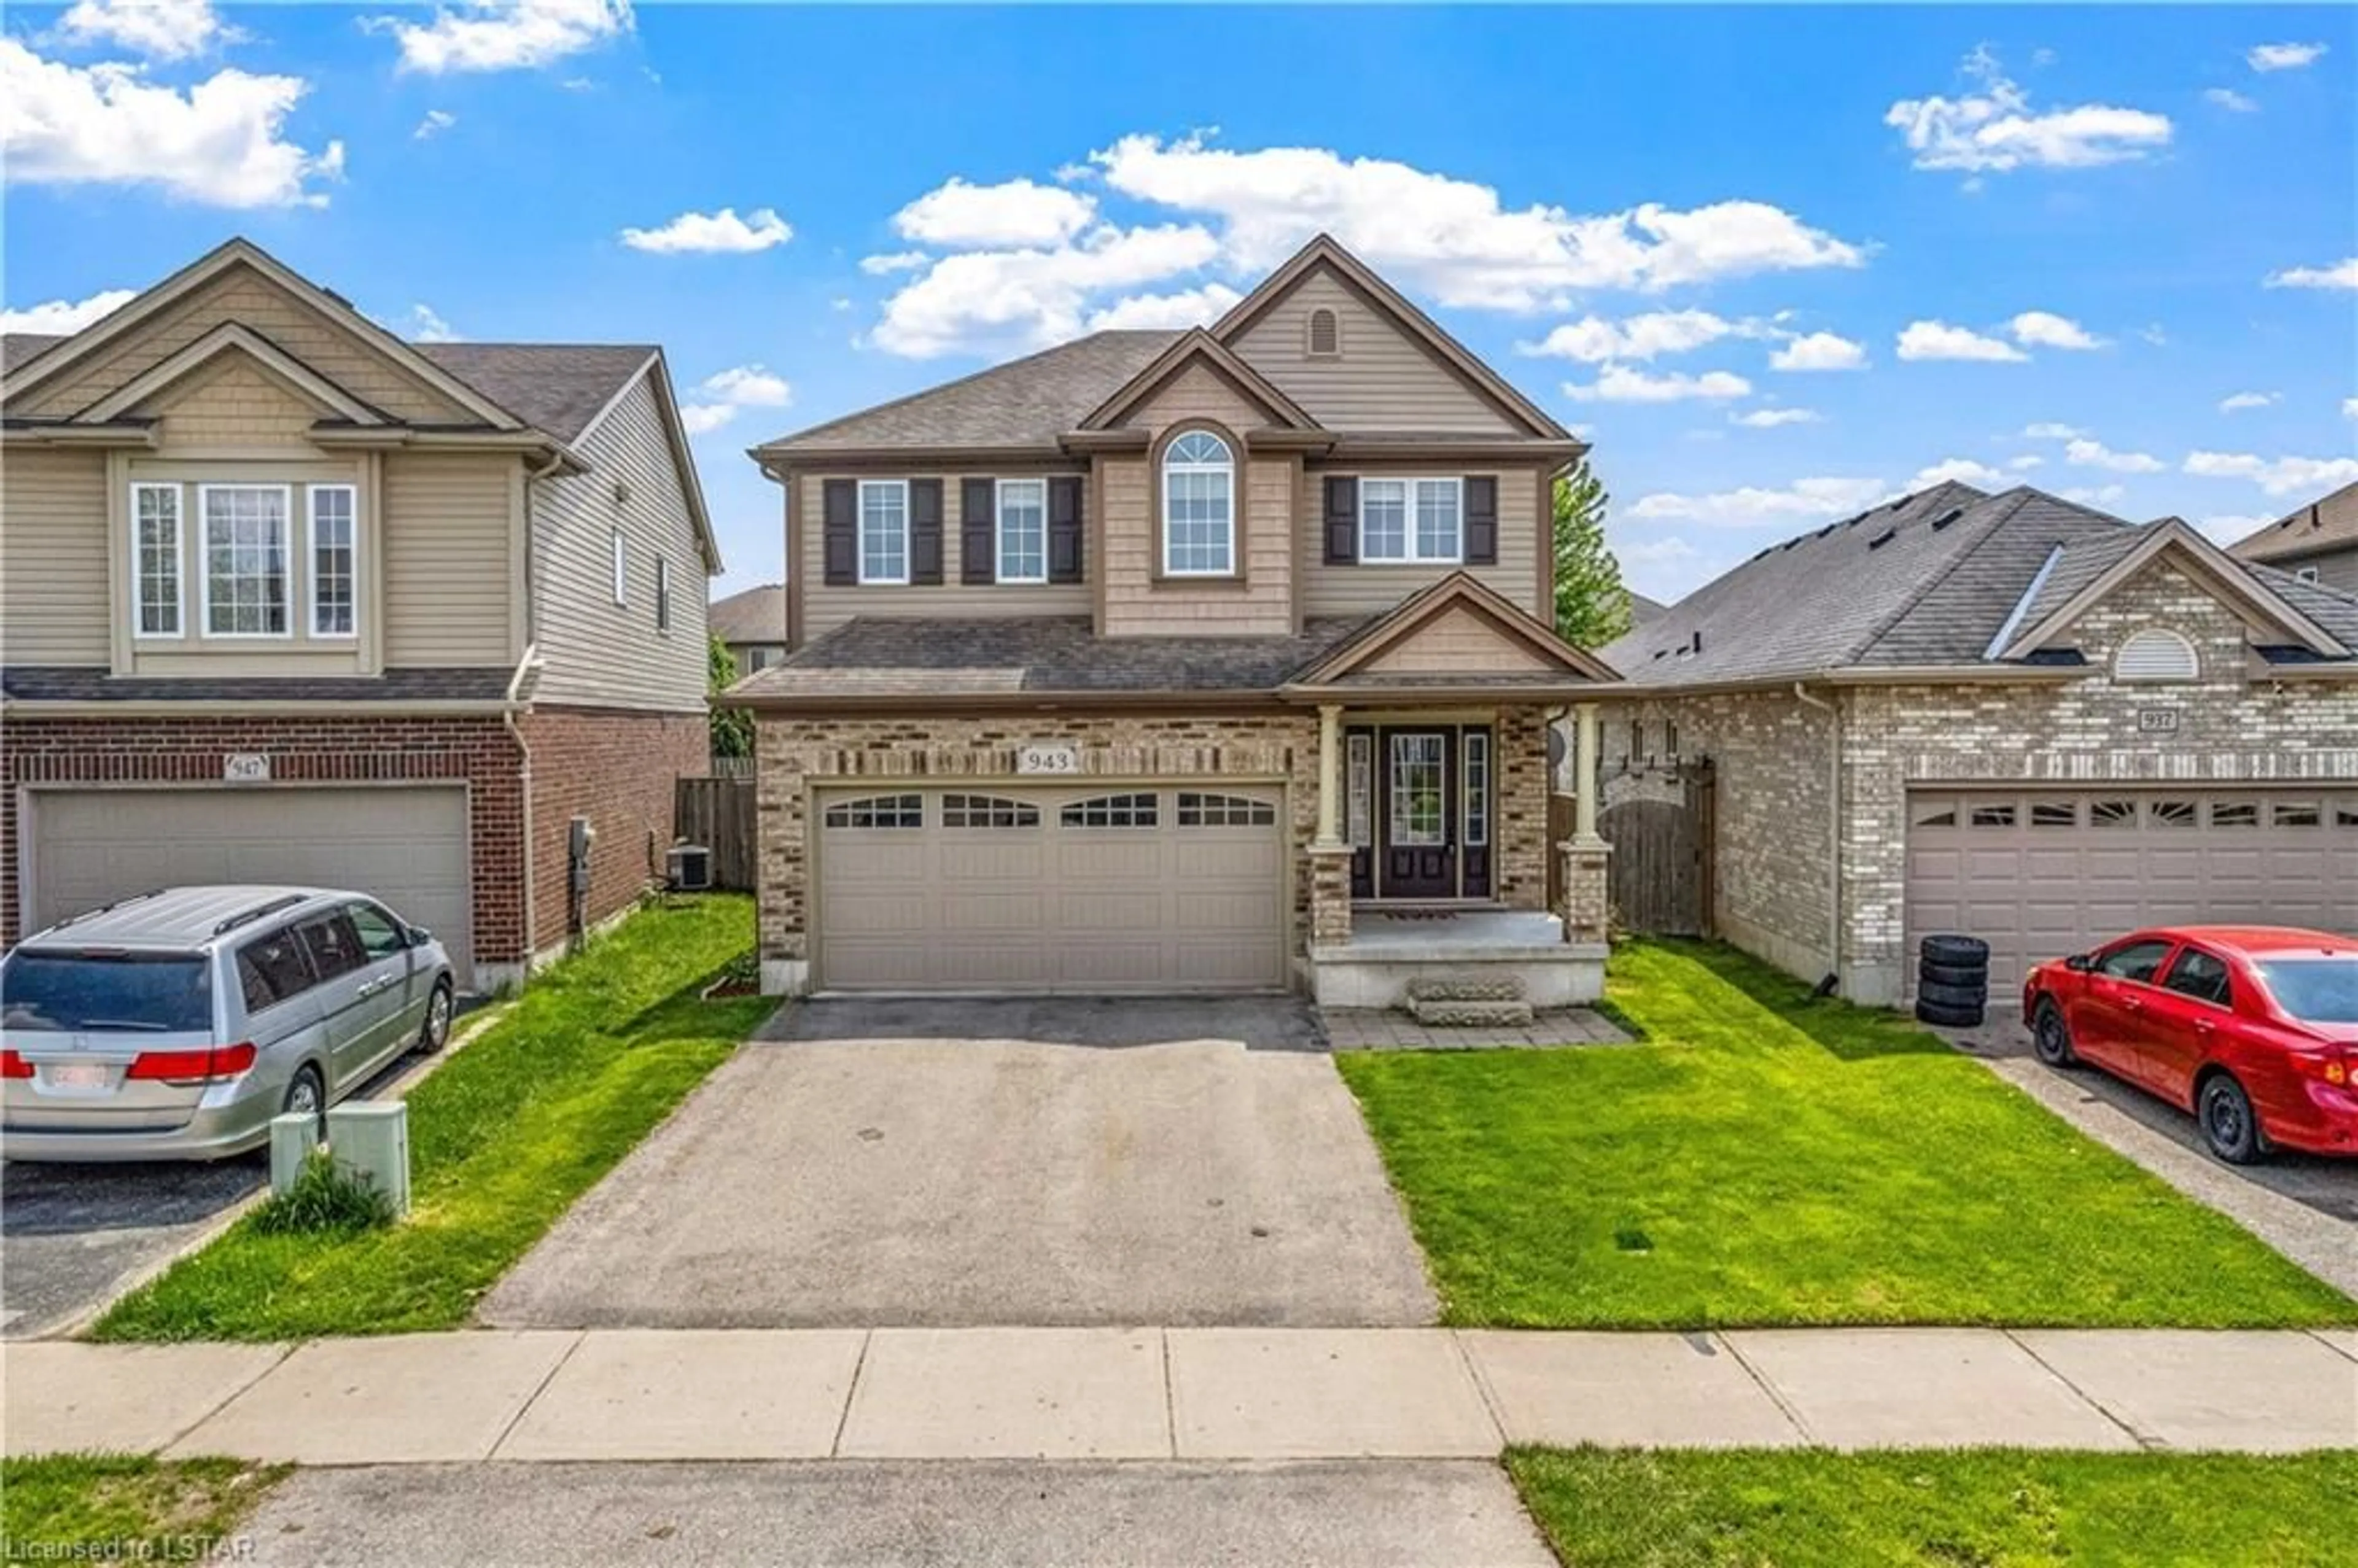 Frontside or backside of a home for 943 Grenfell Dr, London Ontario N5X 4R8